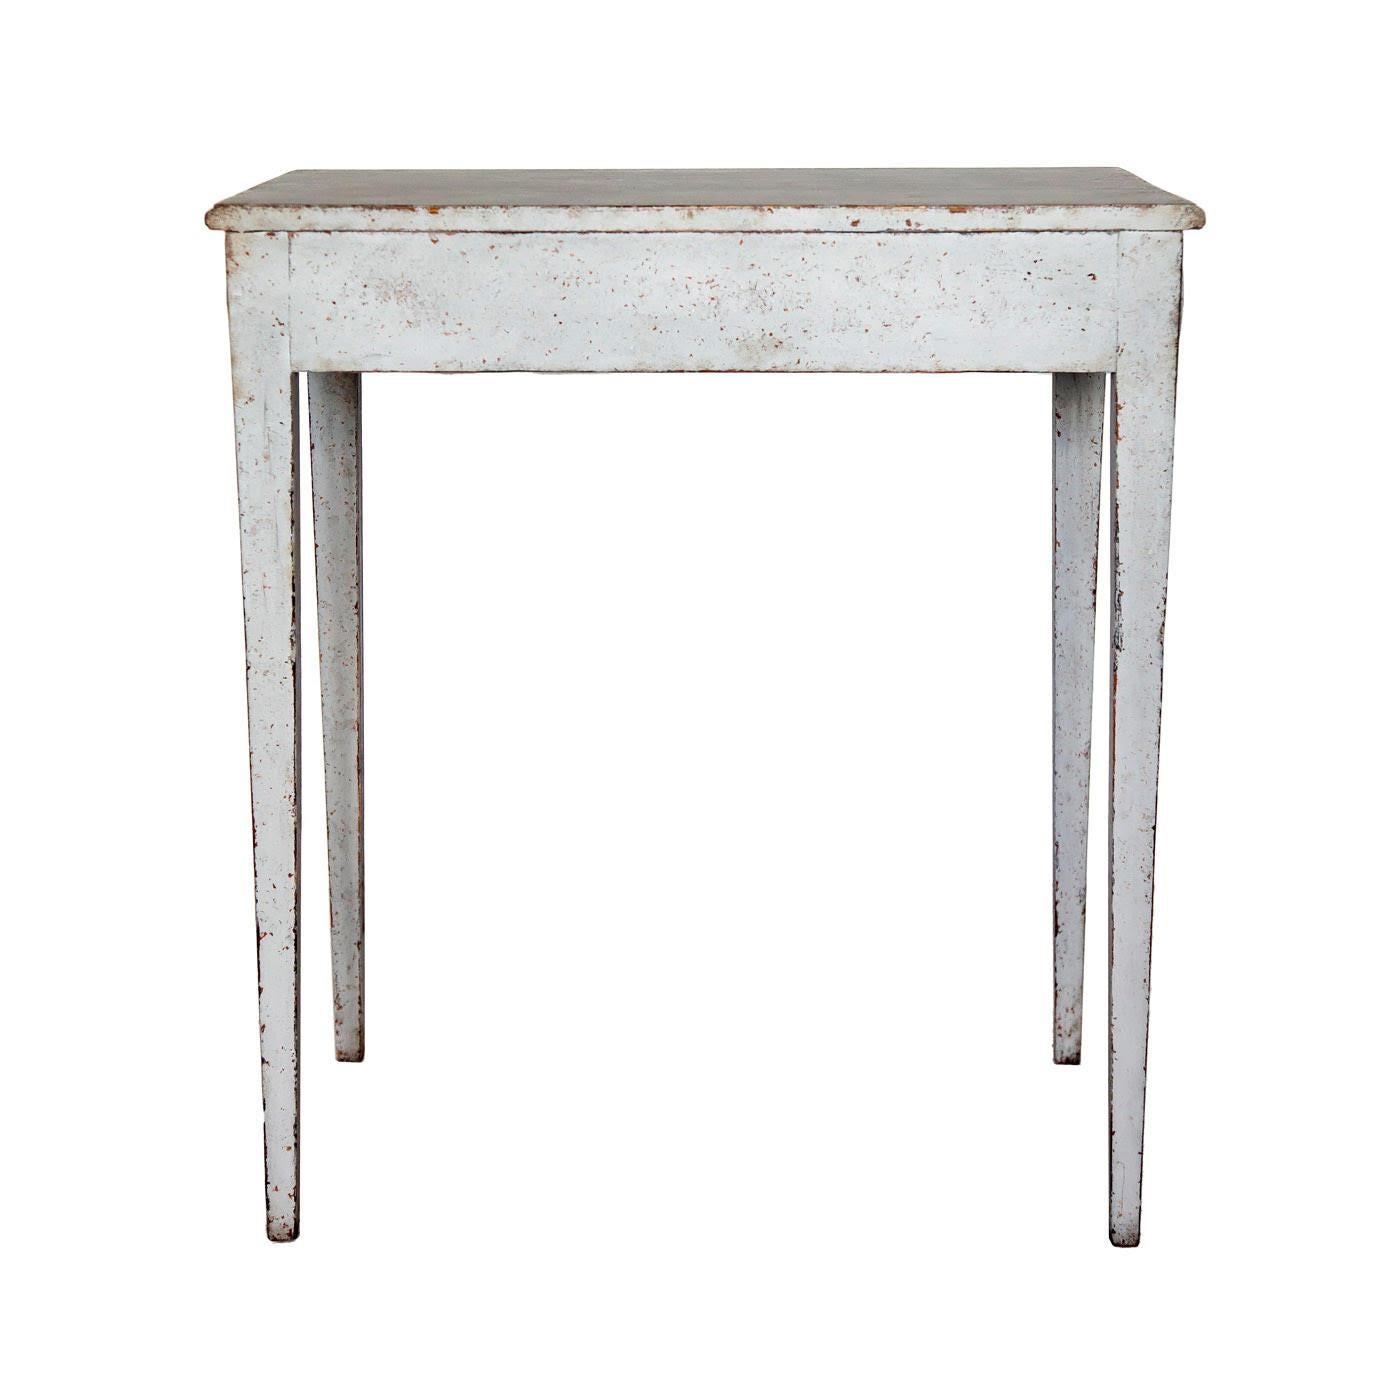 19th Century Swedish Gustavian Antique Table Desk Grey White Carved Detail, C.1860-1870 For Sale